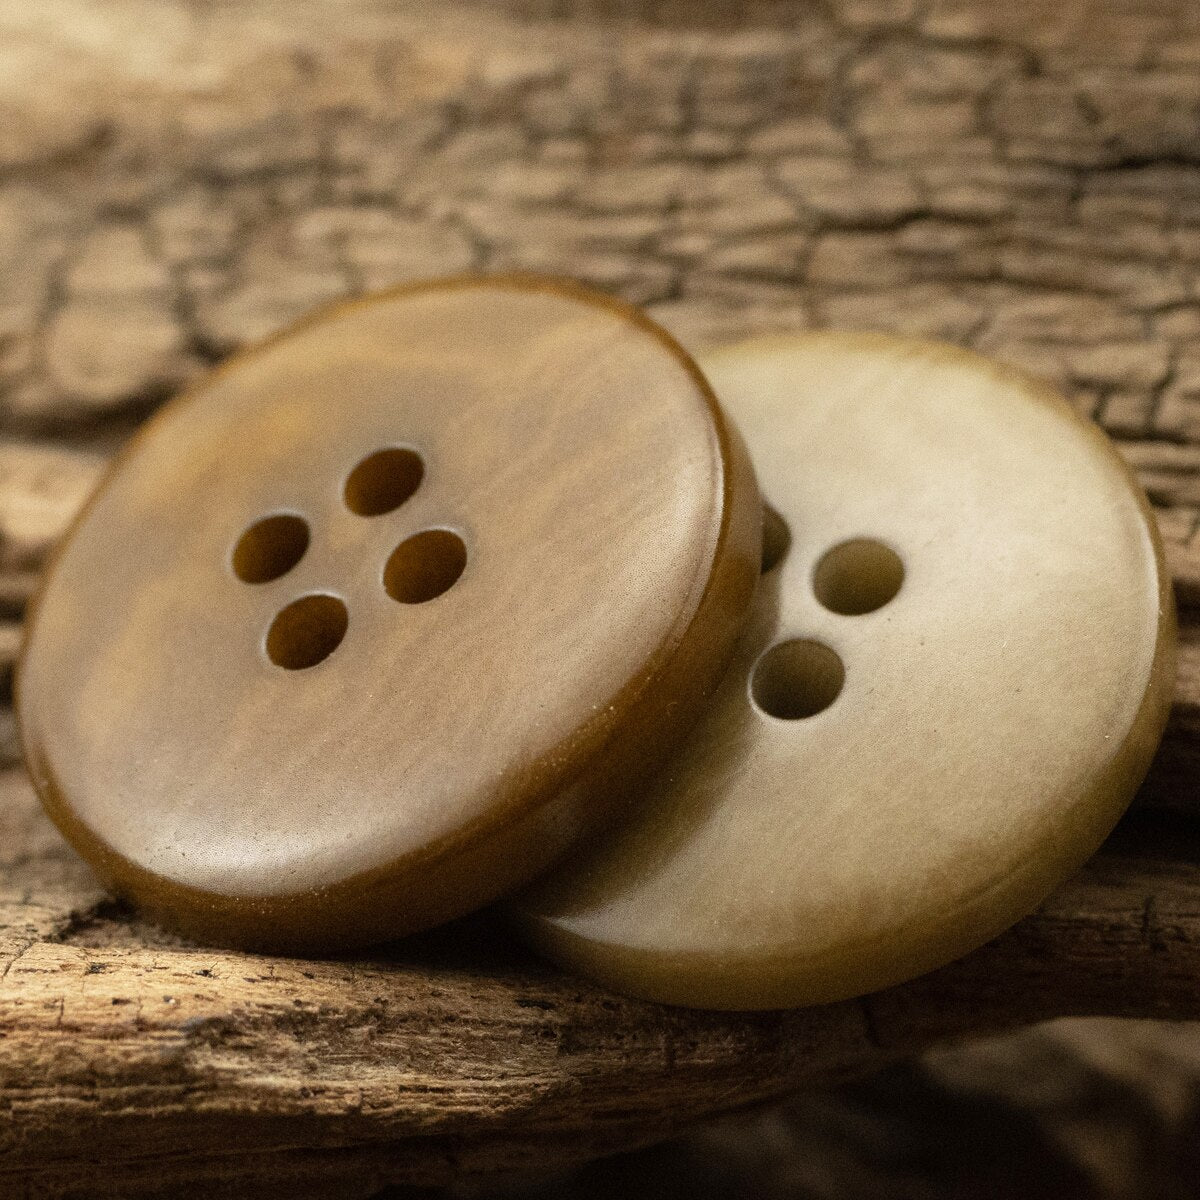 5pcs/lot Khaki Casual Buttons  4 Hole Round Natural Buttons